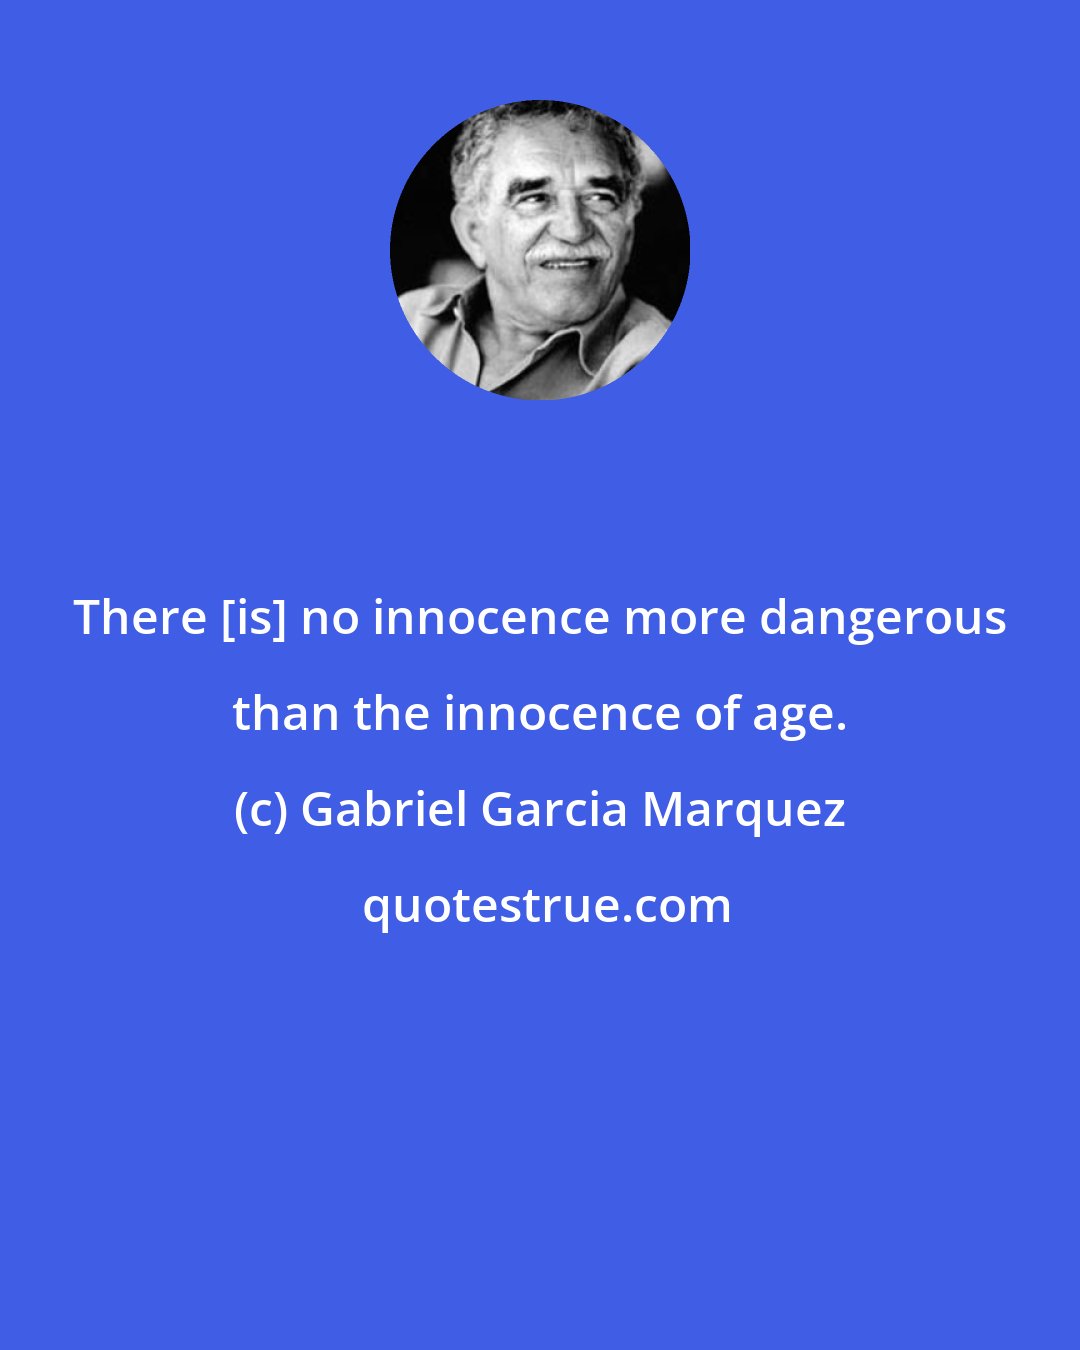 Gabriel Garcia Marquez: There [is] no innocence more dangerous than the innocence of age.